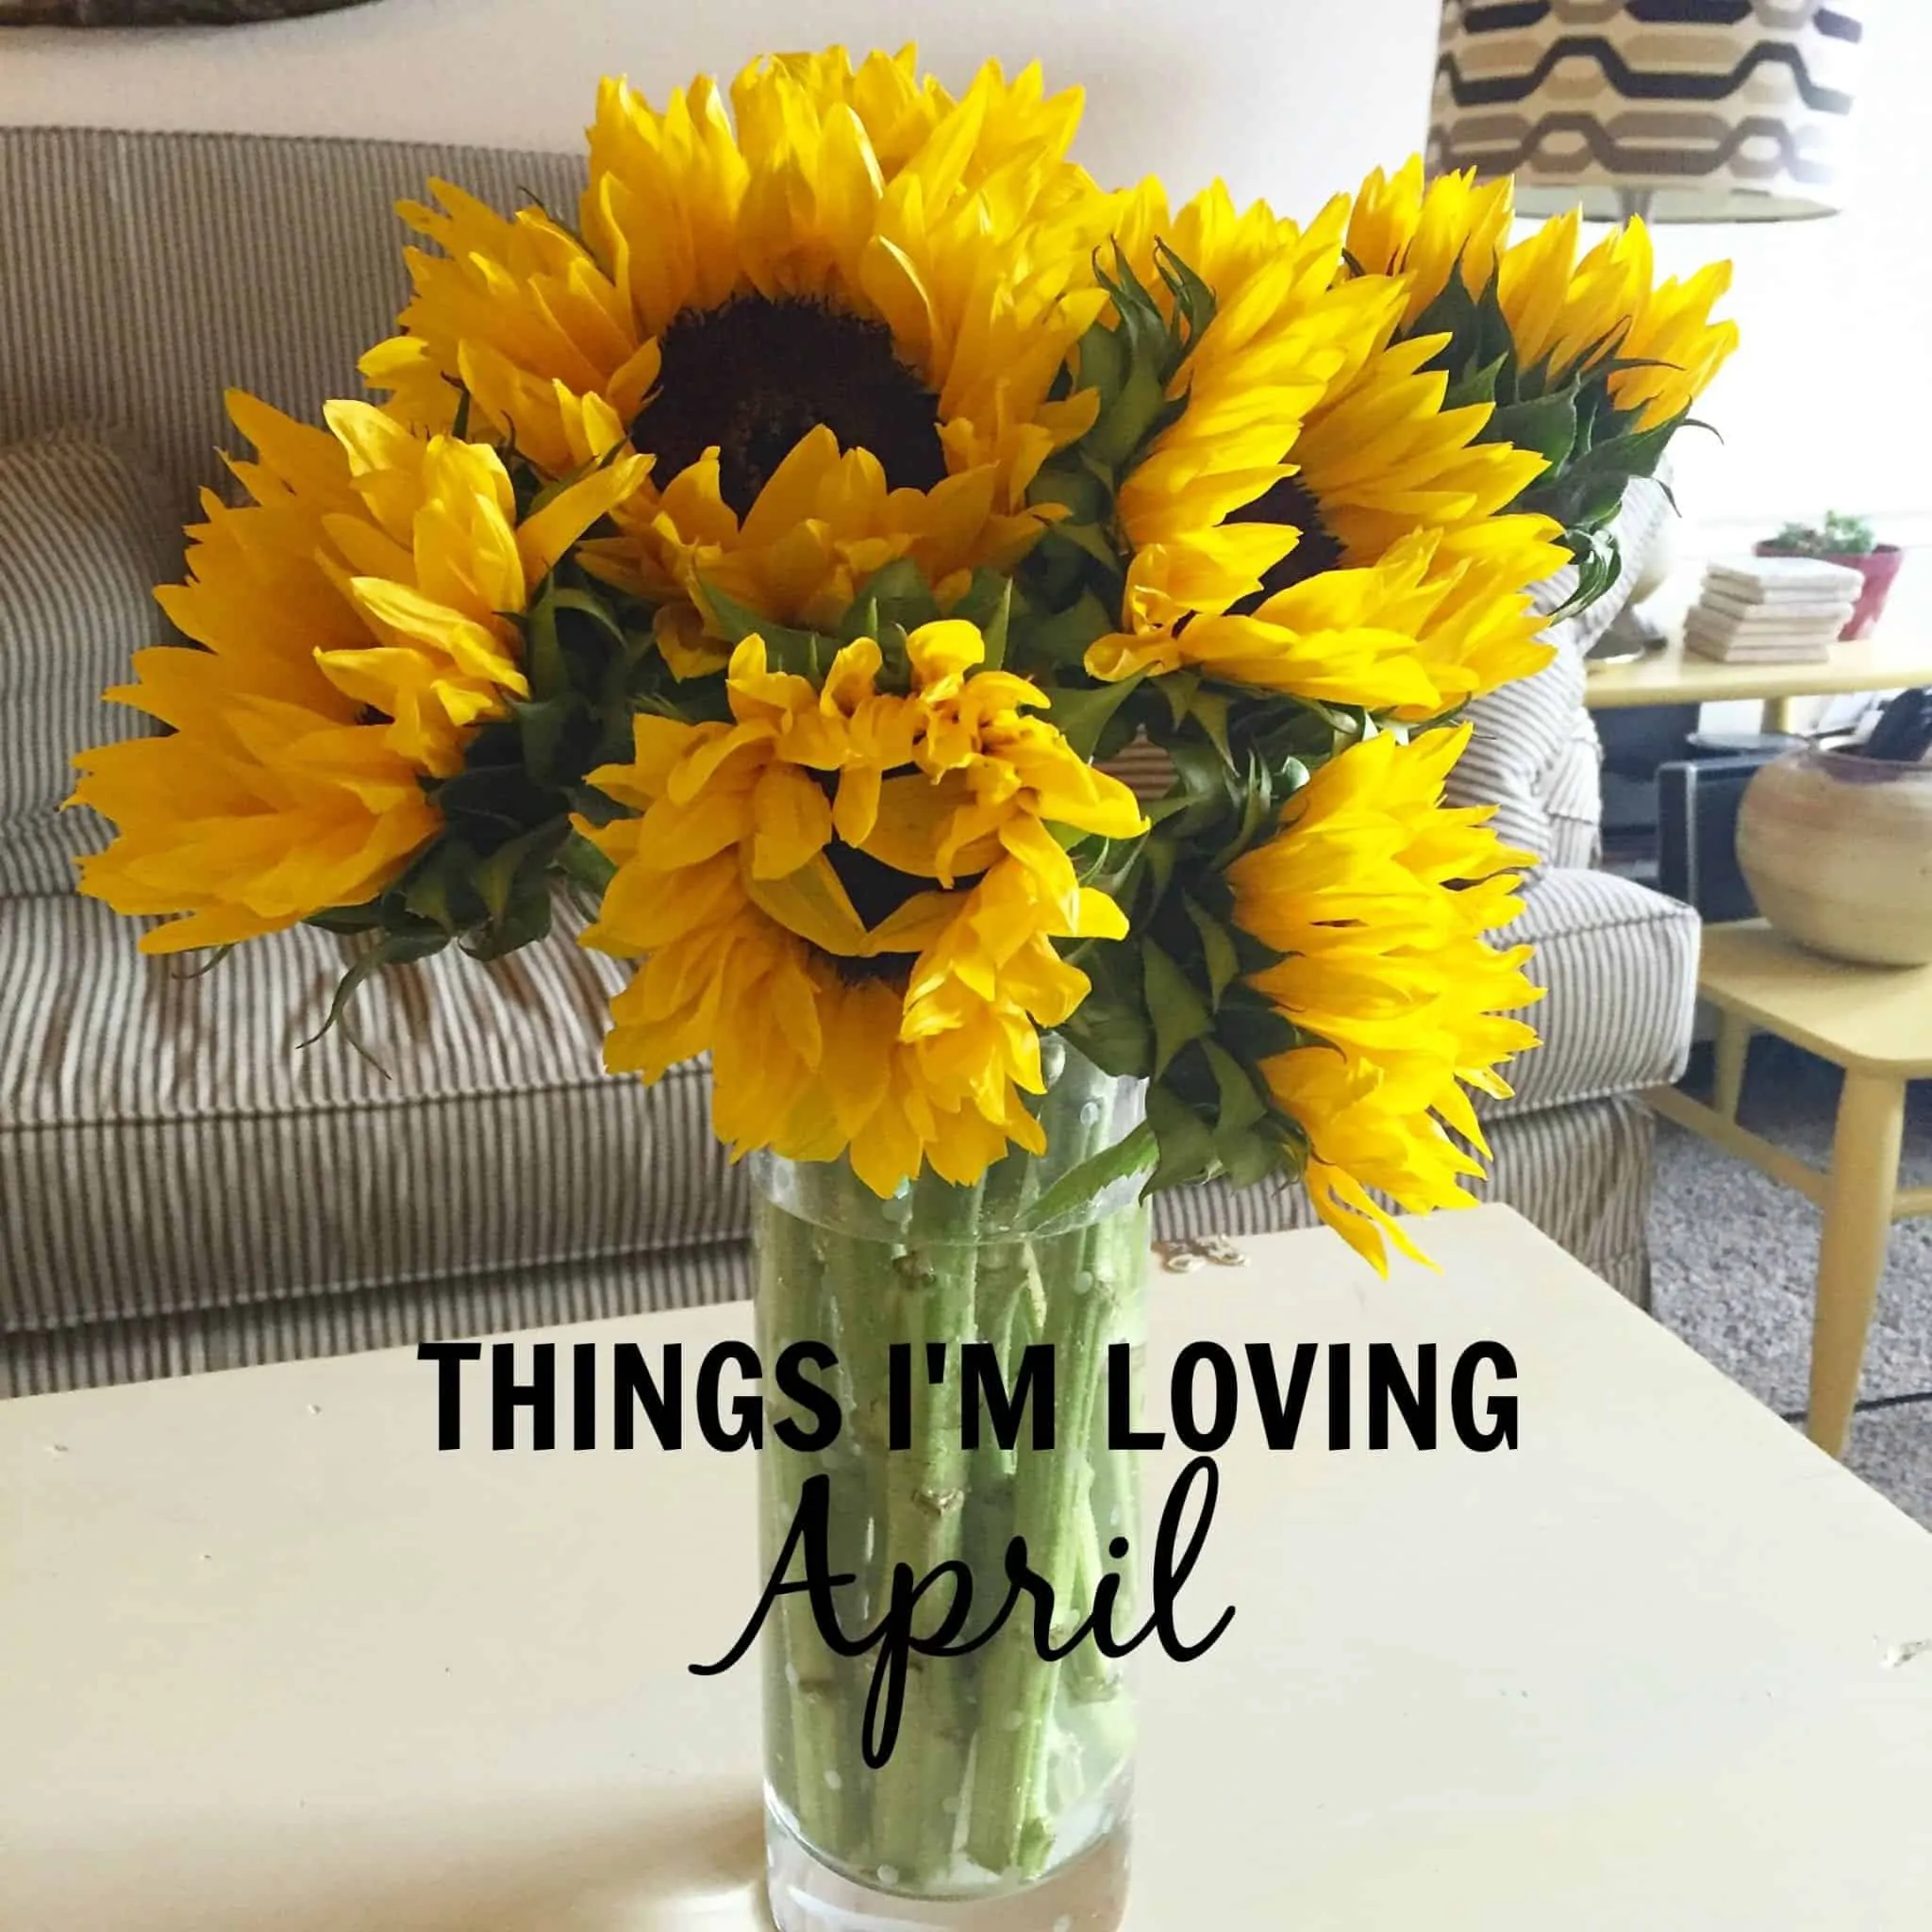 Things I'm Loving April 2016 from Treble in the Kitchen